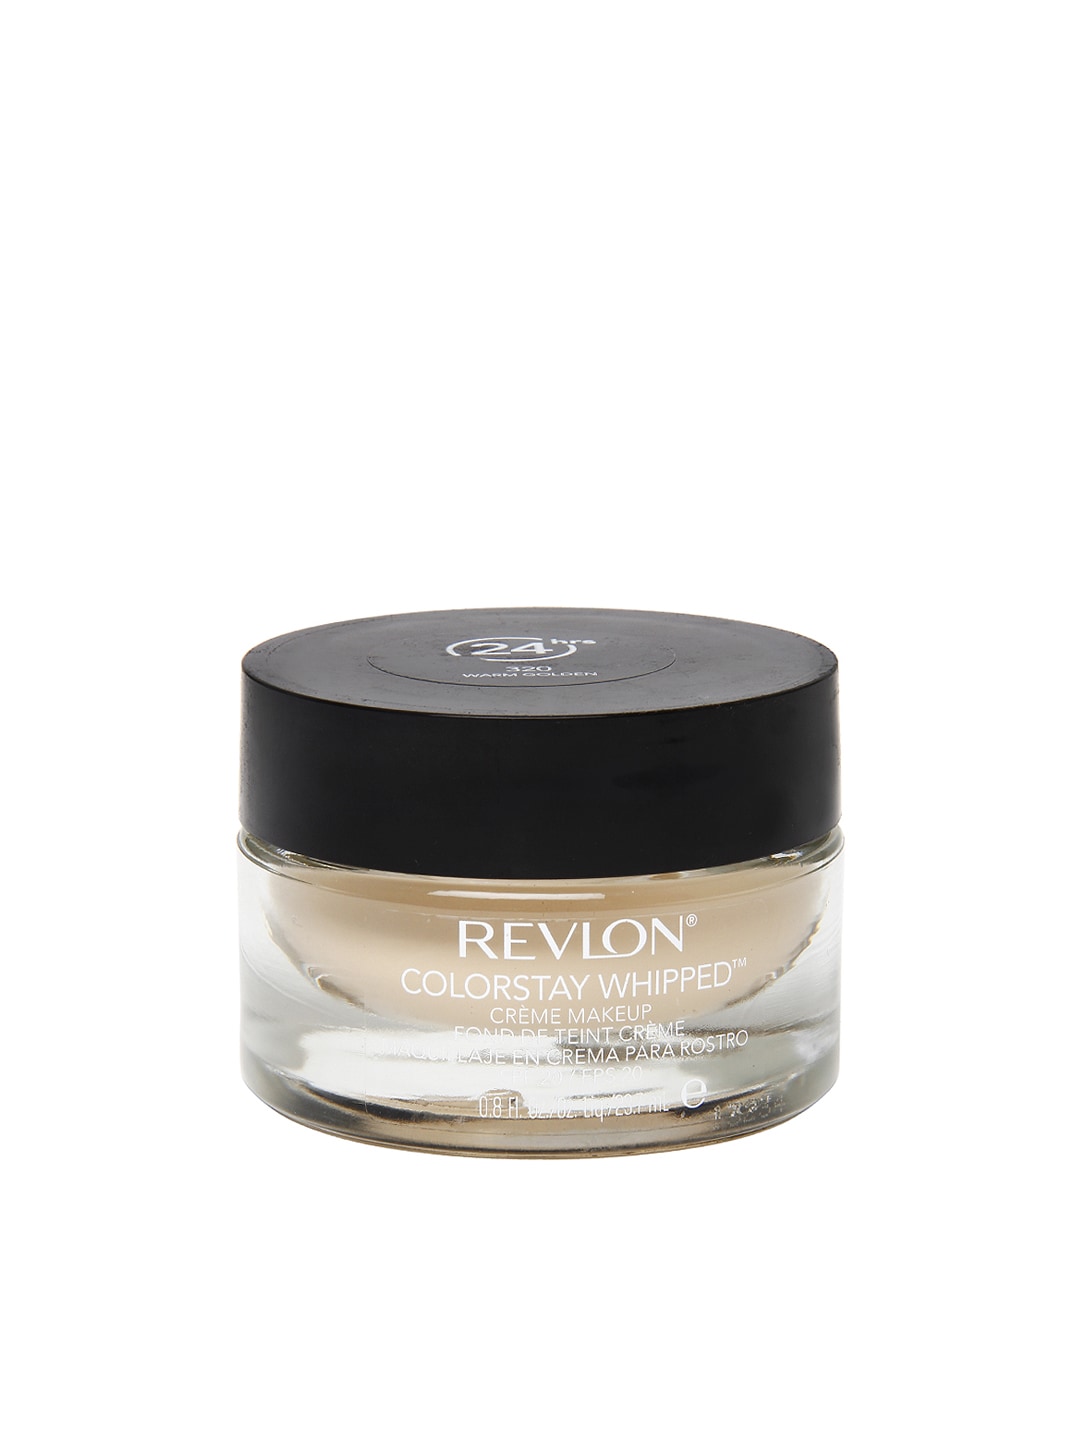 Revlon Colorstay Whipped Creme Make Up - Natural Ochre Price in India